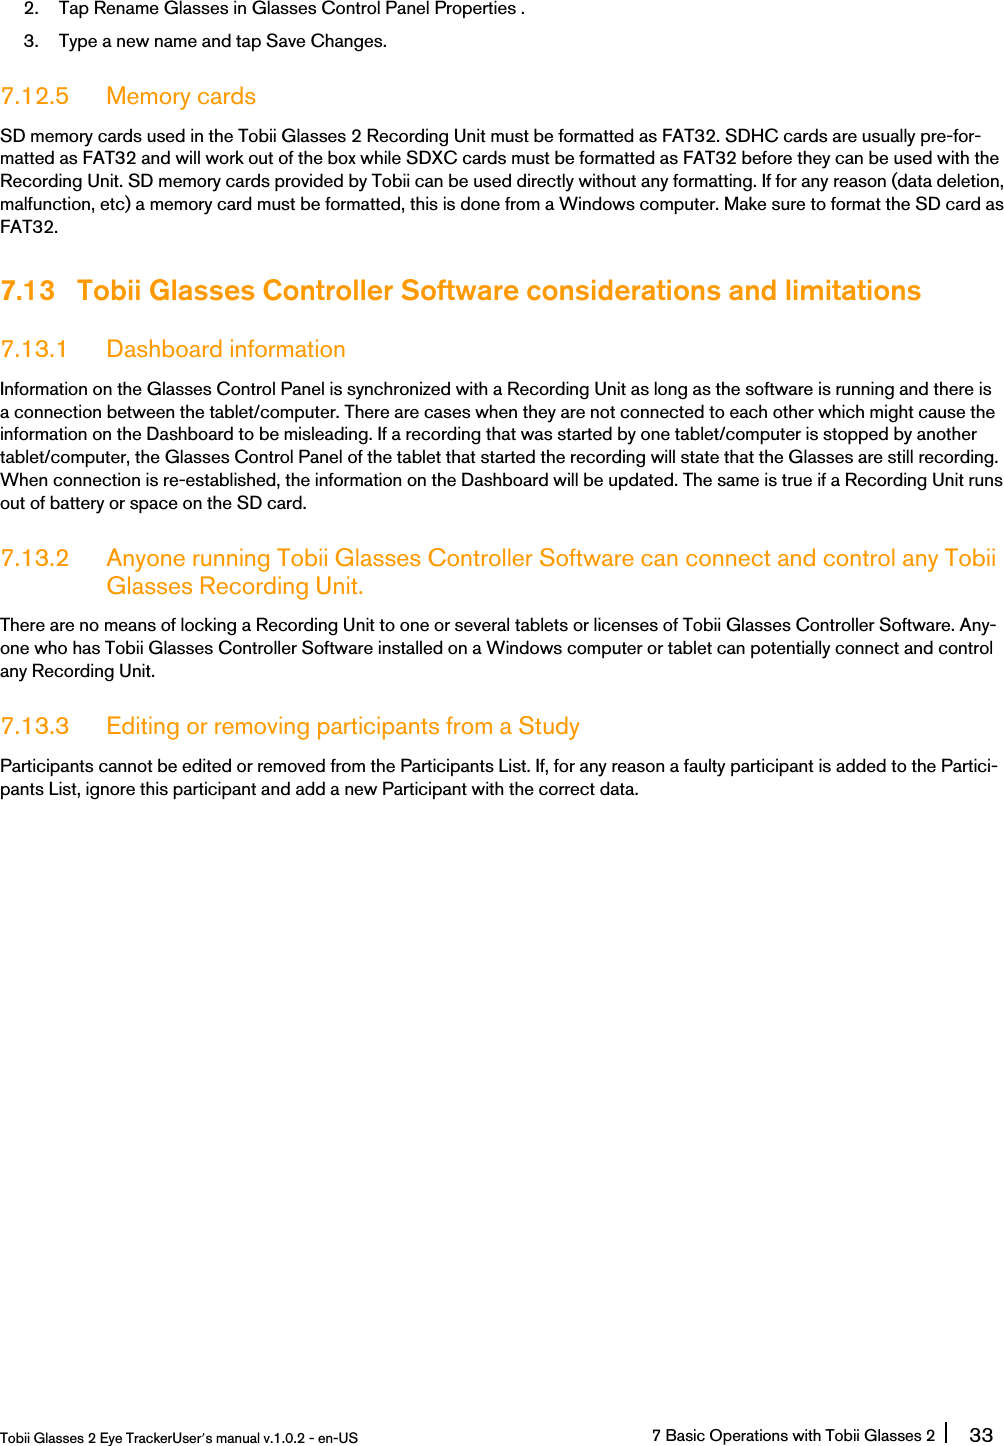 2. Tap Rename Glasses in Glasses Control Panel Properties .3. Type a new name and tap Save Changes.7.12.5 Memory cardsSD memory cards used in the Tobii Glasses 2 Recording Unit must be formatted as FAT32. SDHC cards are usually pre-for-matted as FAT32 and will work out of the box while SDXC cards must be formatted as FAT32 before they can be used with theRecording Unit. SD memory cards provided by Tobii can be used directly without any formatting. If for any reason (data deletion,malfunction, etc) a memory card must be formatted, this is done from a Windows computer. Make sure to format the SD card asFAT32.7.13 Tobii Glasses Controller Software considerations and limitations7.13.1 Dashboard informationInformation on the Glasses Control Panel is synchronized with a Recording Unit as long as the software is running and there isa connection between the tablet/computer. There are cases when they are not connected to each other which might cause theinformation on the Dashboard to be misleading. If a recording that was started by one tablet/computer is stopped by anothertablet/computer, the Glasses Control Panel of the tablet that started the recording will state that the Glasses are still recording.When connection is re-established, the information on the Dashboard will be updated. The same is true if a Recording Unit runsout of battery or space on the SD card.7.13.2 Anyone running Tobii Glasses Controller Software can connect and control any TobiiGlasses Recording Unit.There are no means of locking a Recording Unit to one or several tablets or licenses of Tobii Glasses Controller Software. Any-one who has Tobii Glasses Controller Software installed on a Windows computer or tablet can potentially connect and controlany Recording Unit.7.13.3 Editing or removing participants from a StudyParticipants cannot be edited or removed from the Participants List. If, for any reason a faulty participant is added to the Partici-pants List, ignore this participant and add a new Participant with the correct data.Tobii Glasses 2 Eye TrackerUser’s manual v.1.0.2 - en-US 7 Basic Operations with Tobii Glasses 2 33